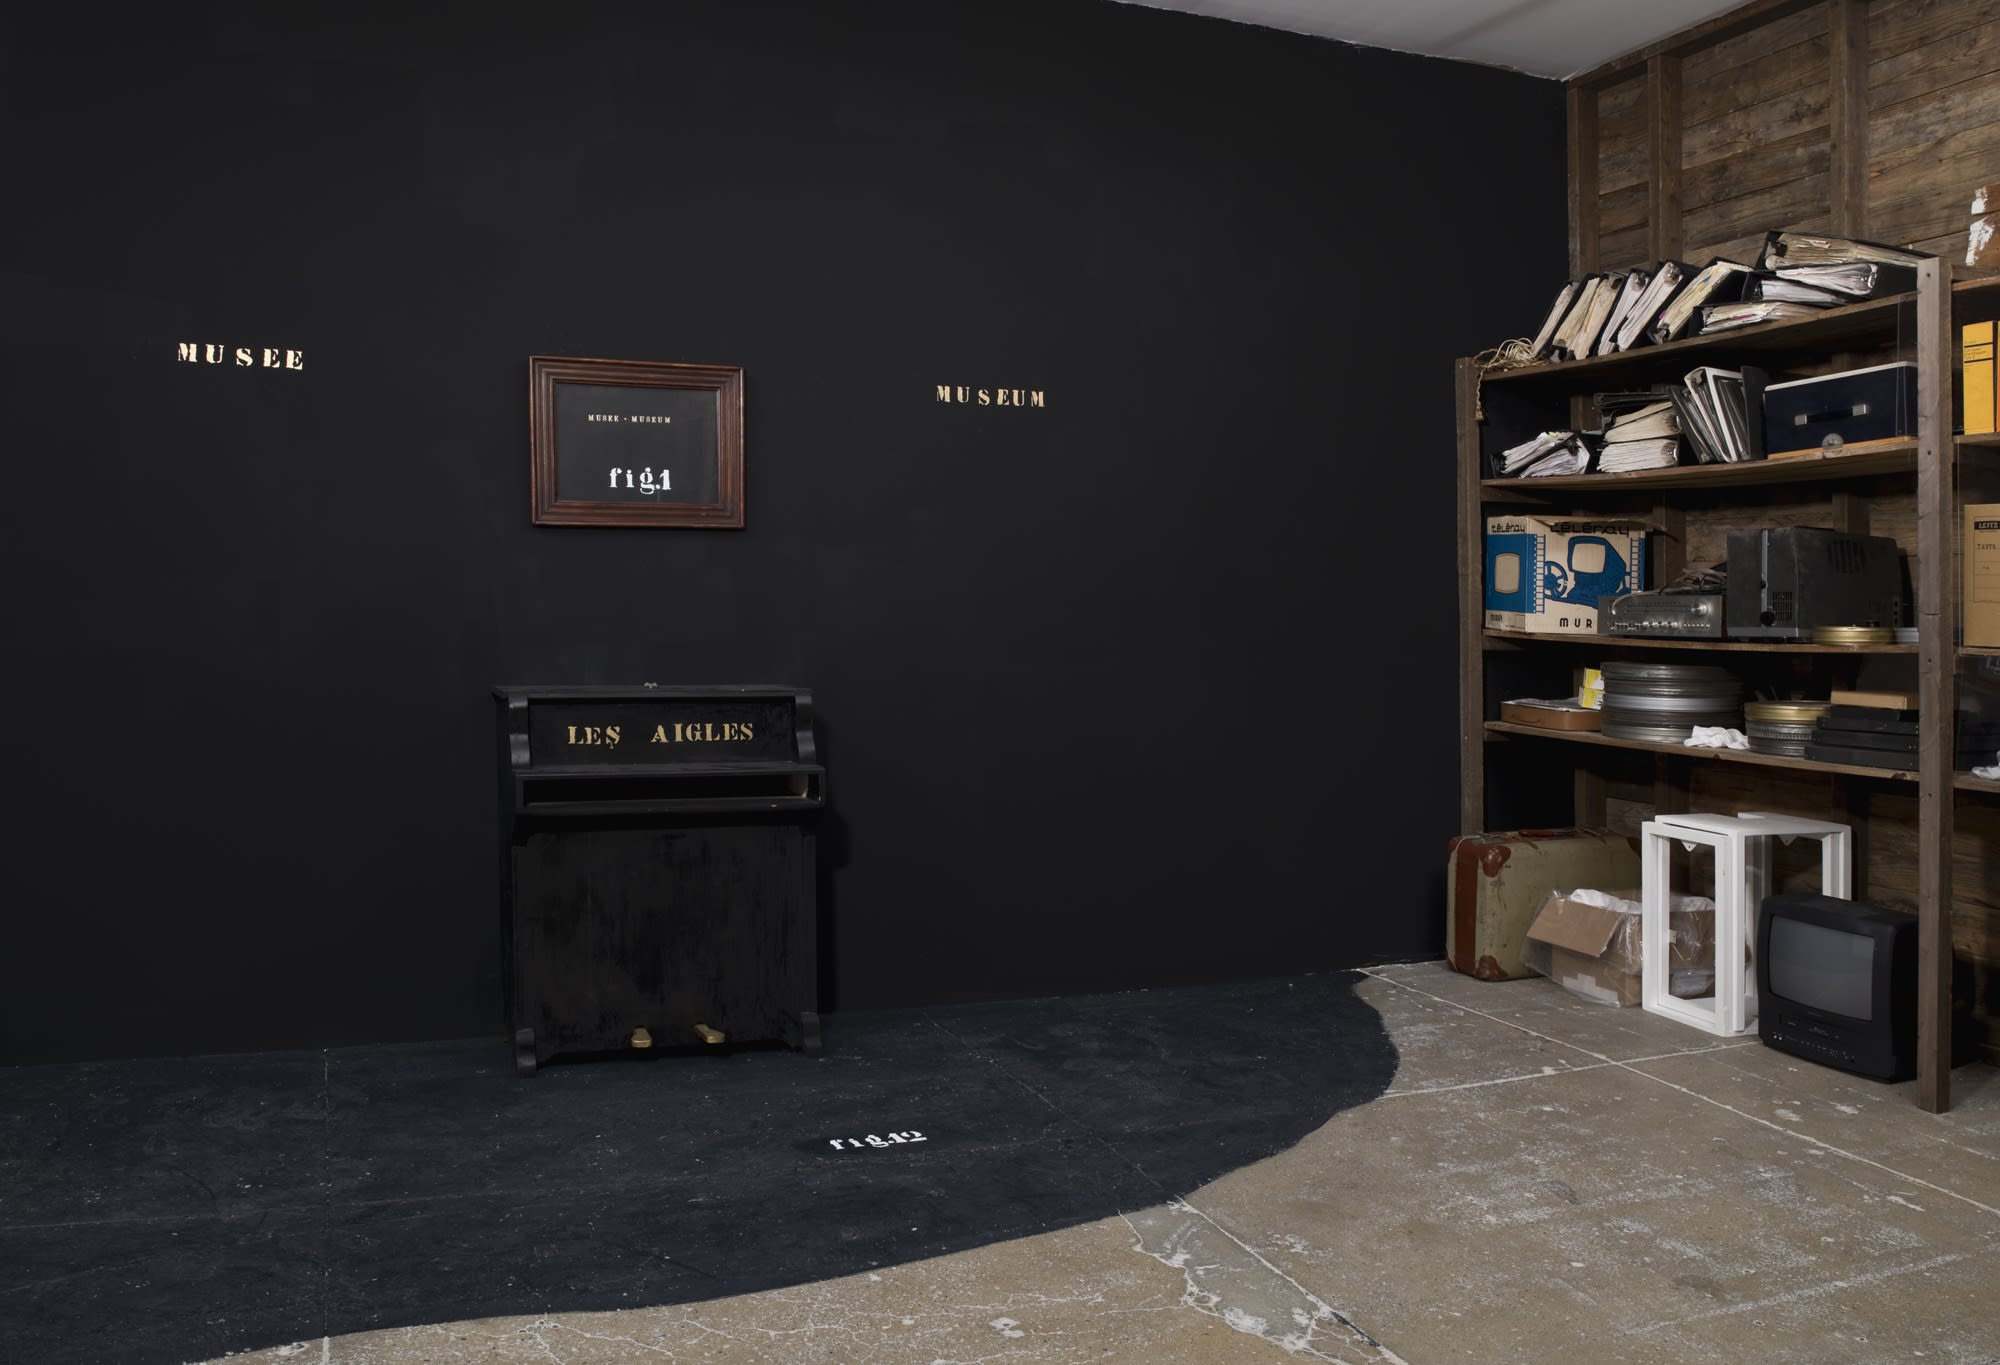 On a black wall, gold text reads MUSEE and MUSEUM on either side of a wood frame containing a black painting that reads the same thing, along with: fig. 1, in white text. Under it, gold text on a black baby piano reads: DES AIGLES. On the right wall, a wo